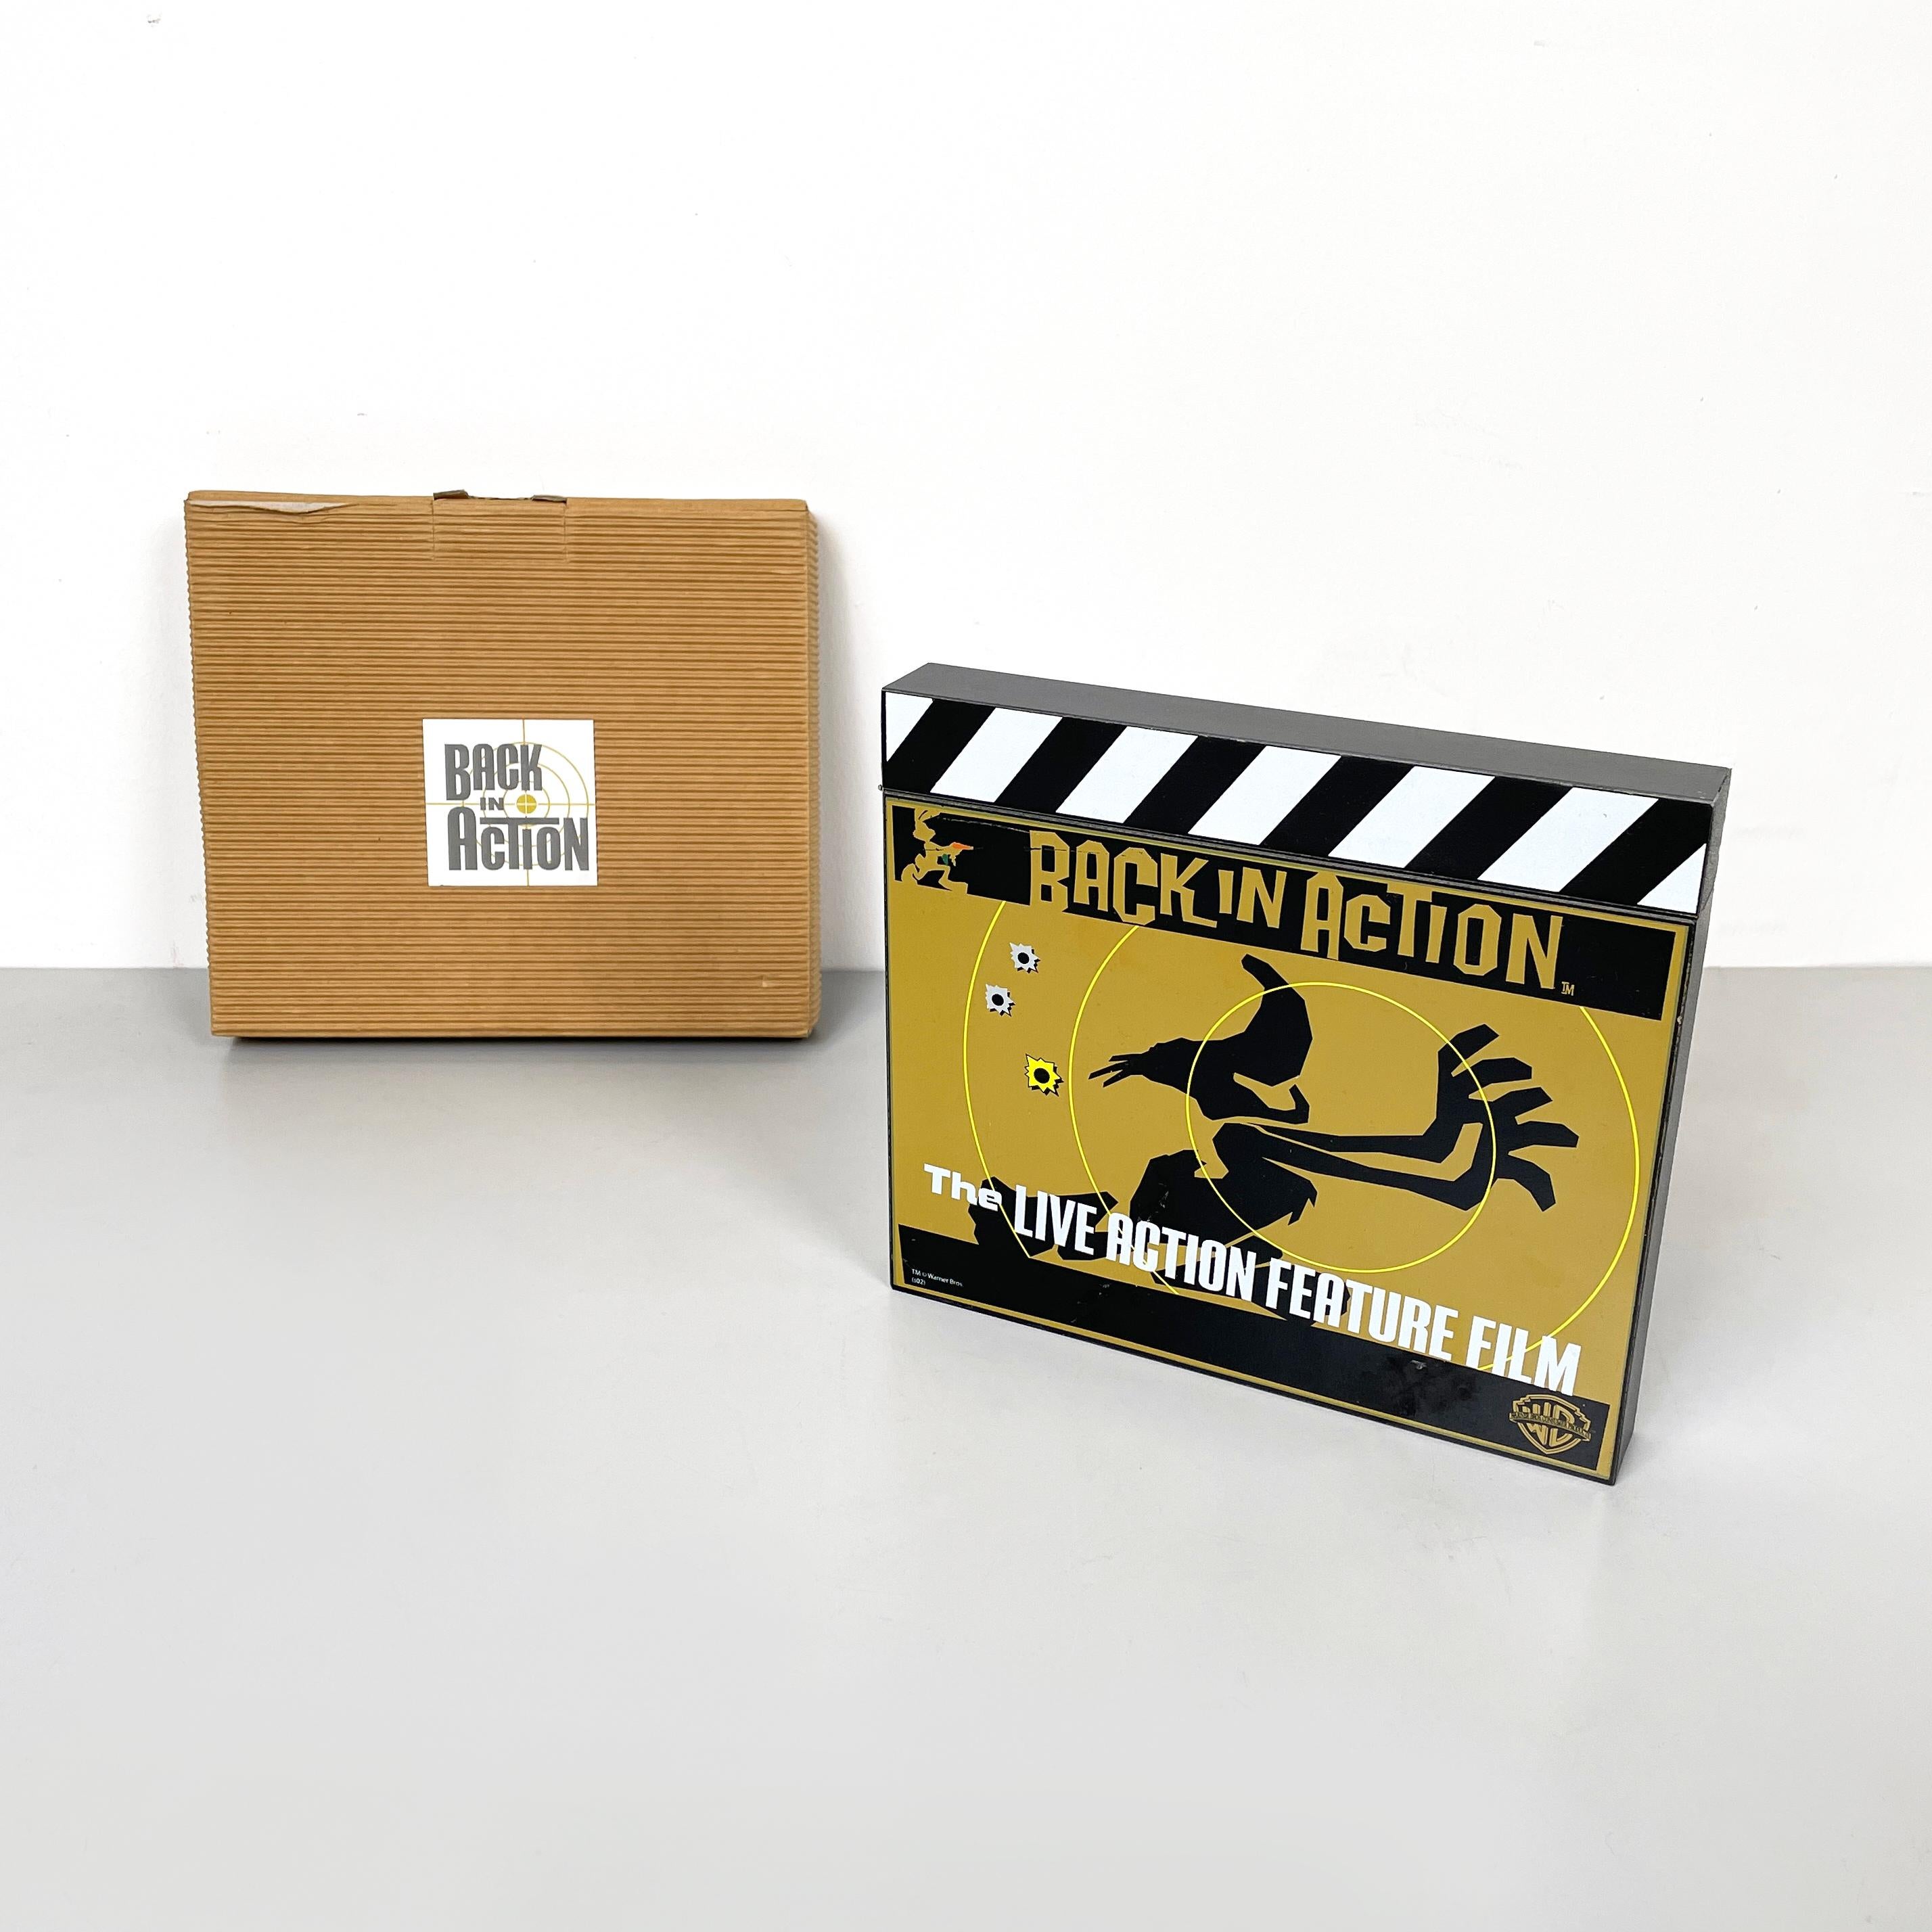 Italy modern Wood clapperboard Looney Tunes: Back in action by Warner Bros Studios, 2003
Wooden clapperboard distributed to promote the cinema release of the film Looney Tunes: Back in action. The movie tablet features Daffy Duck running away in the